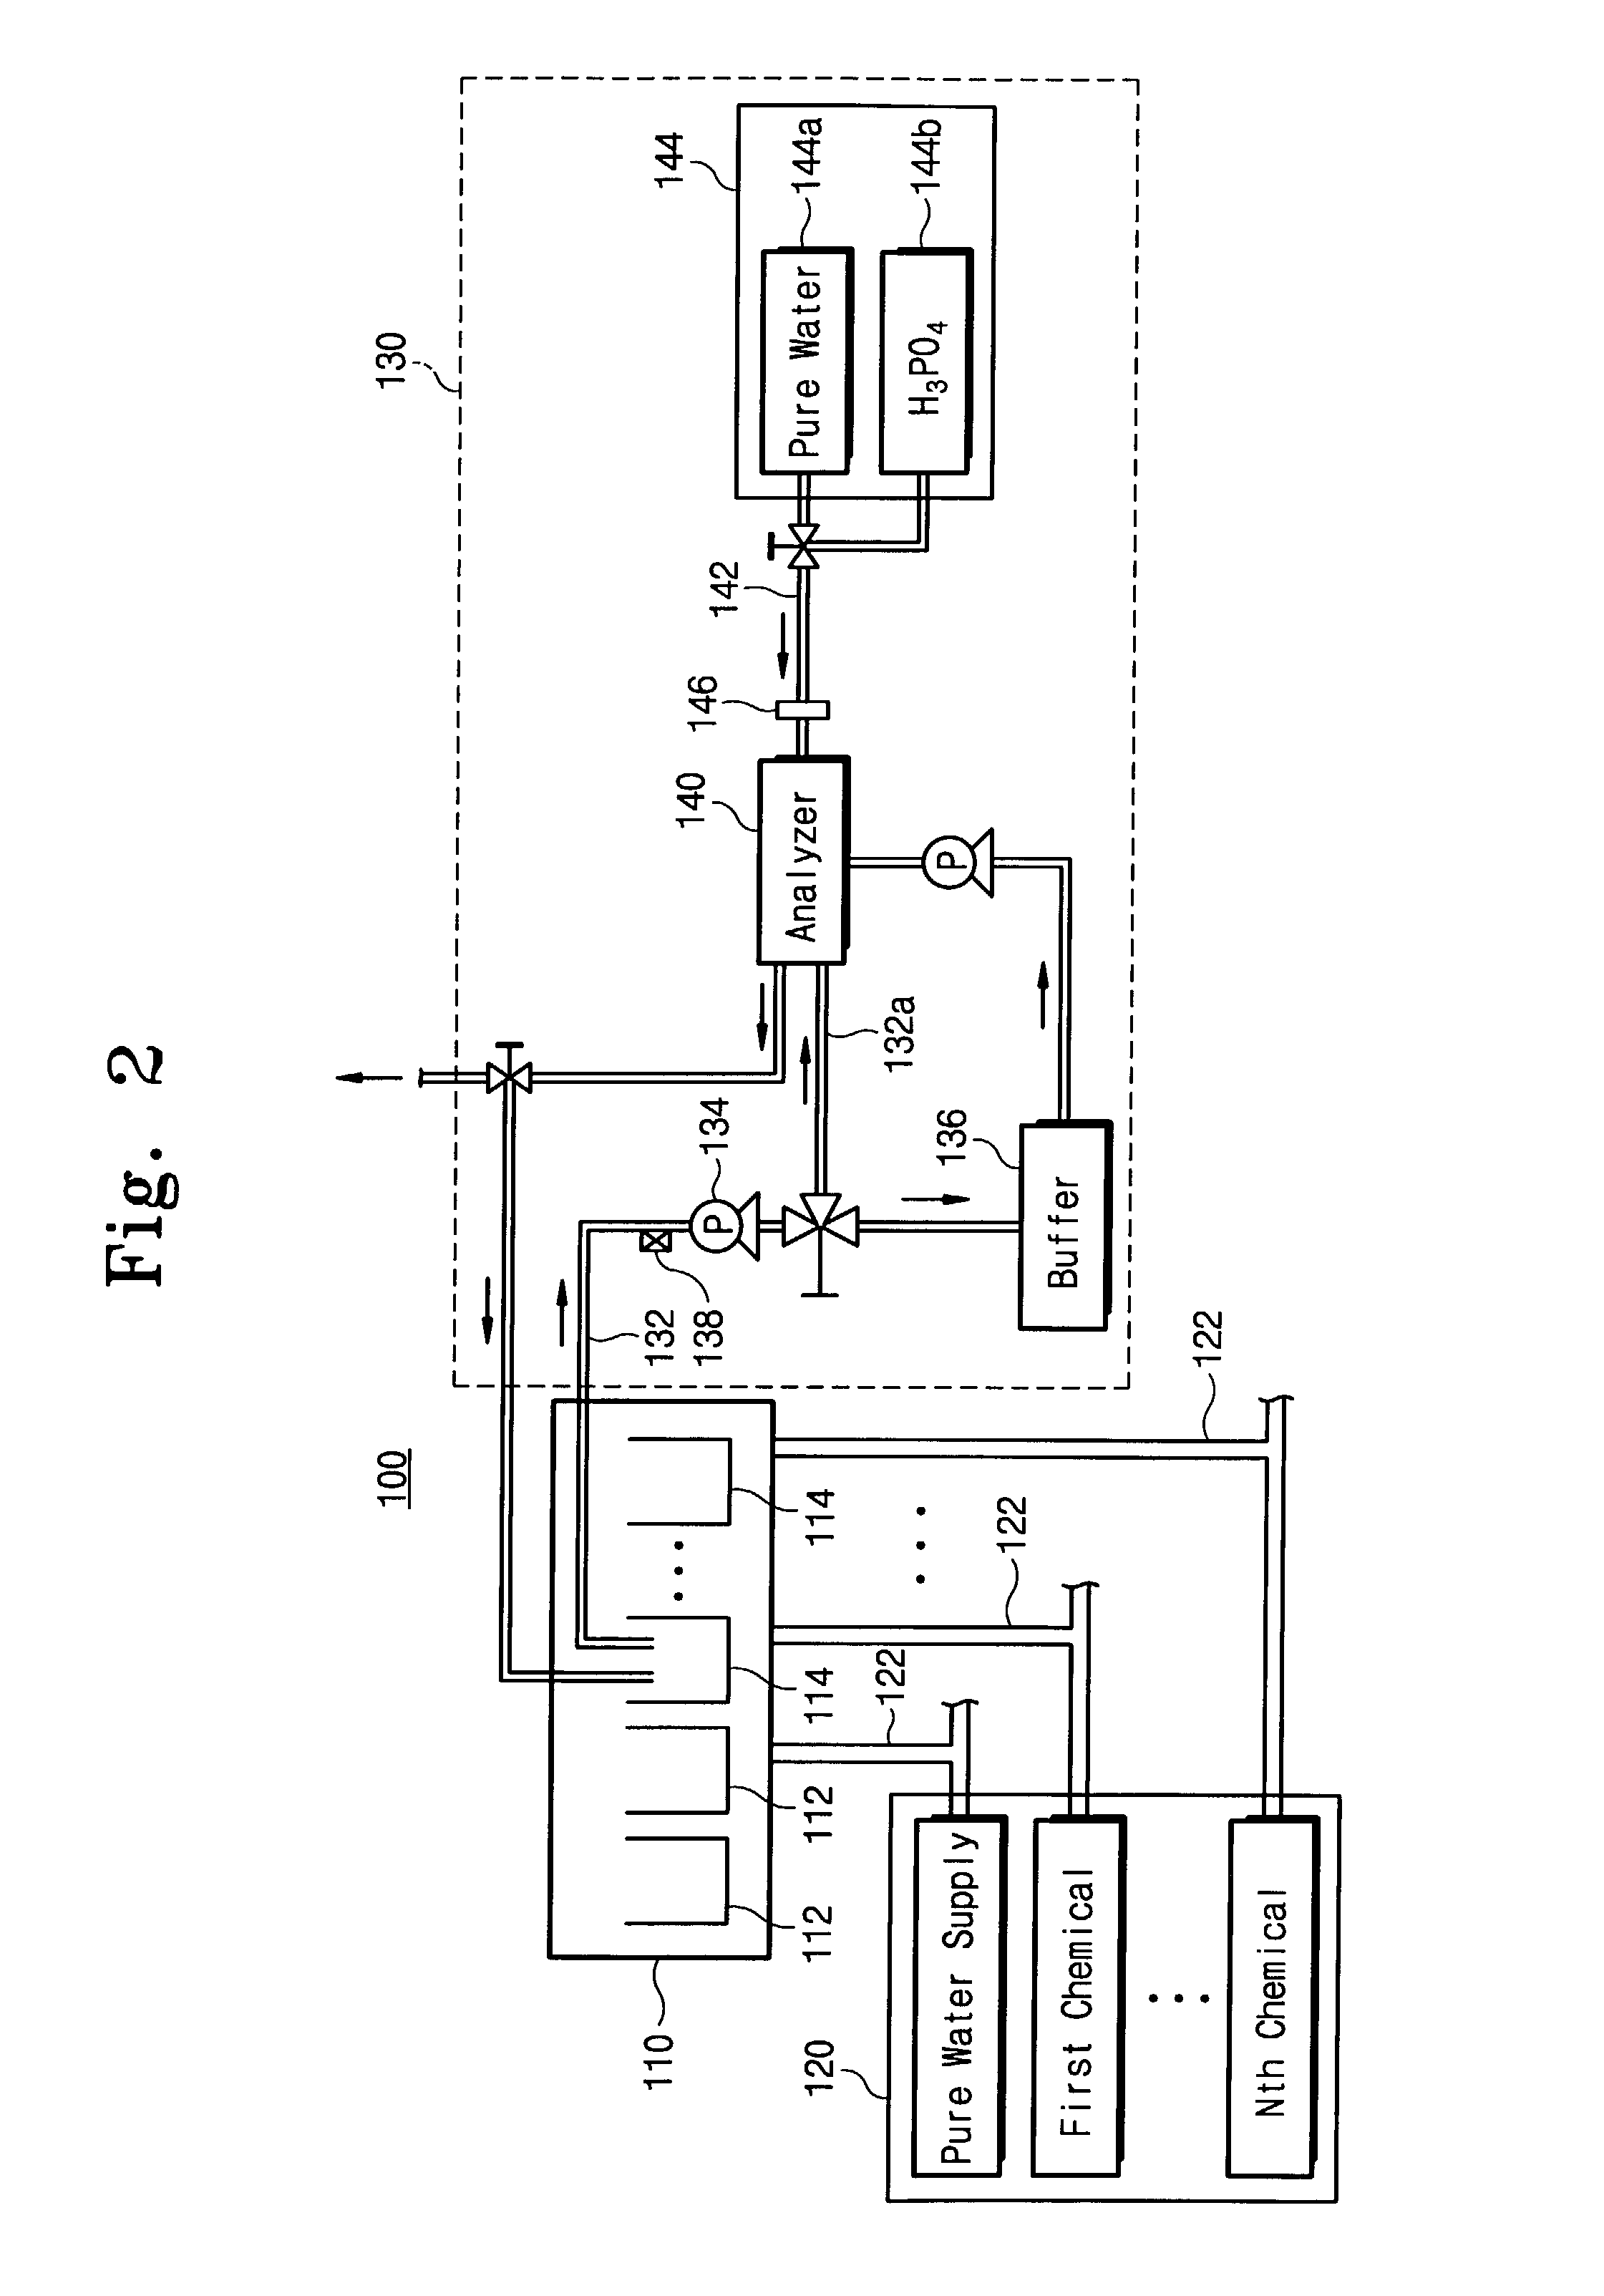 Method and apparatus for automatically measuring the concentration of TOC in a fluid used in a semiconductor manufacturing process